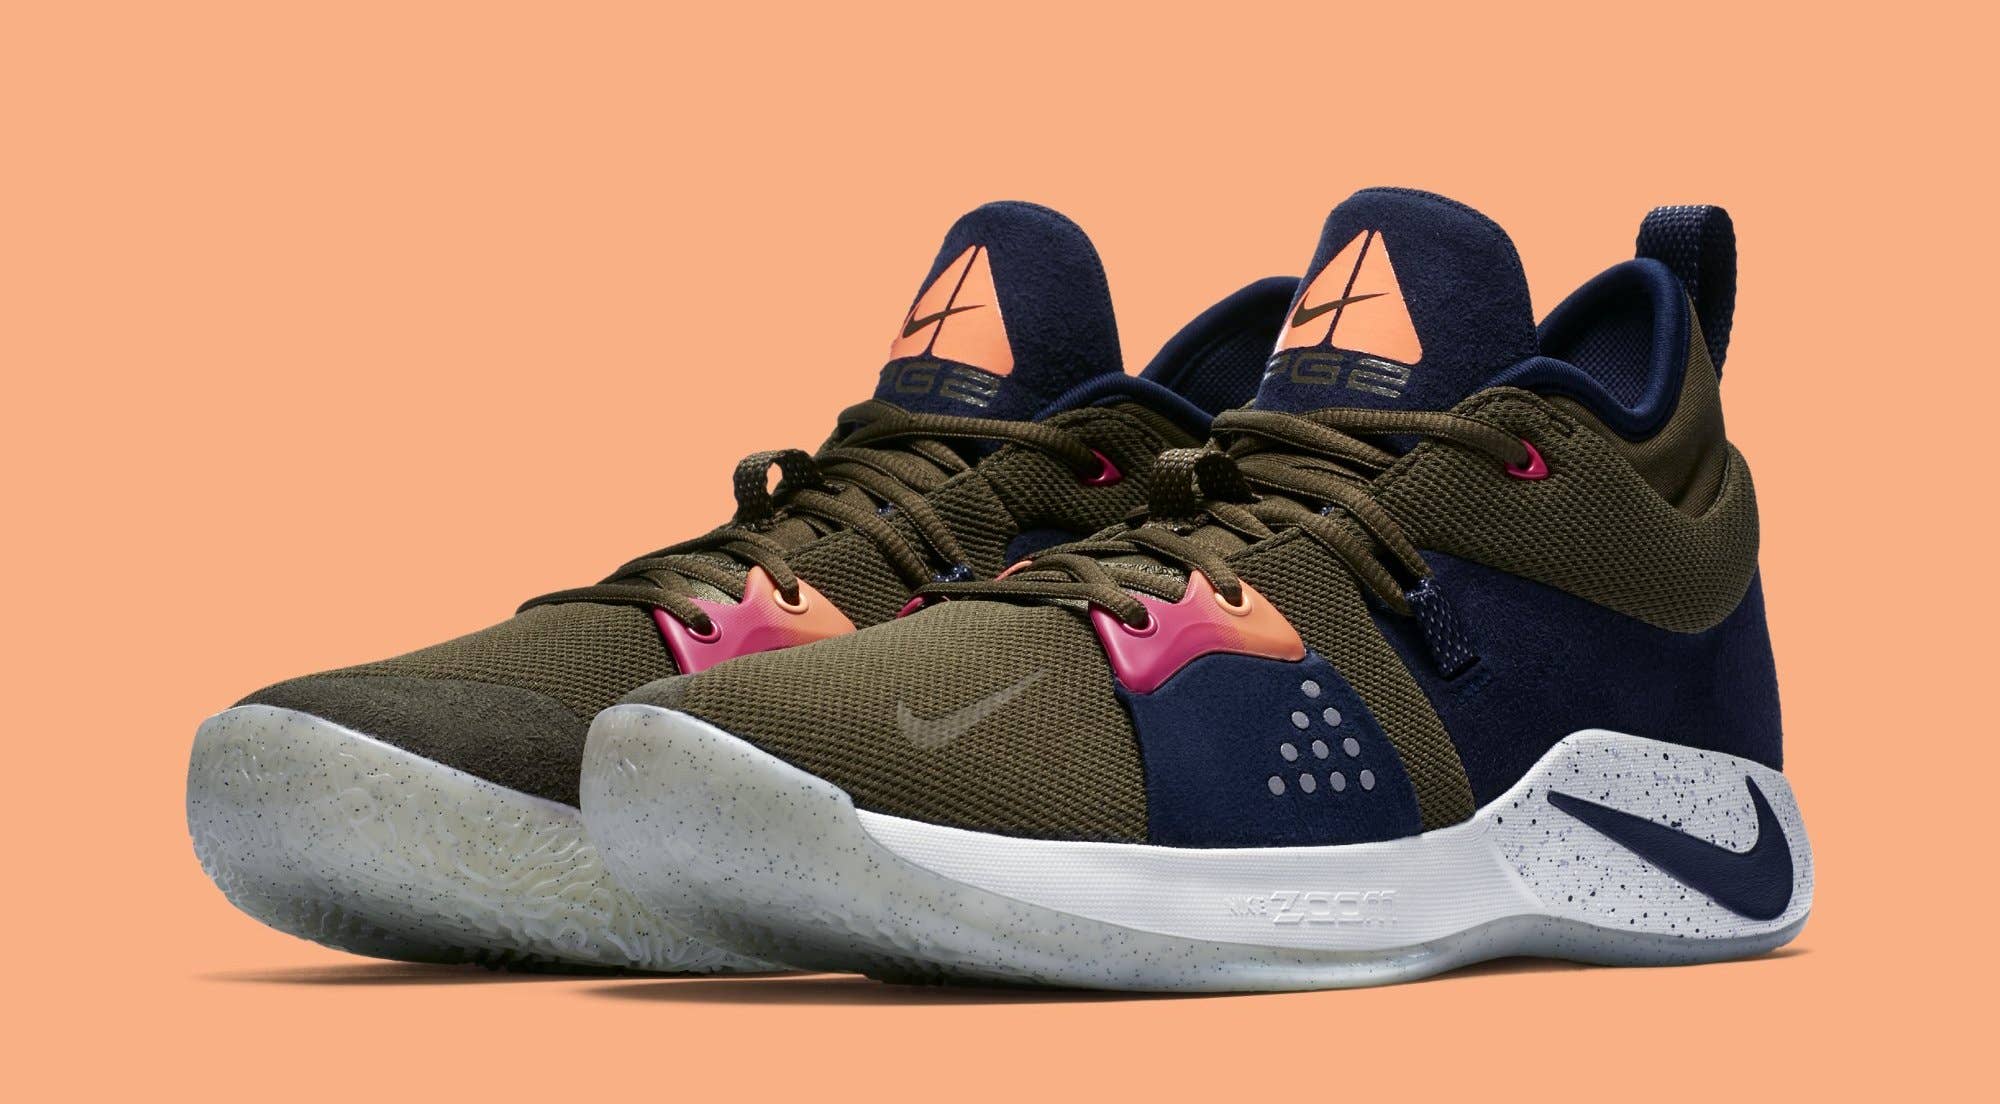 What Pros Wear: Paul George's Nike PG 2 / PG 2.5 Shoes - What Pros